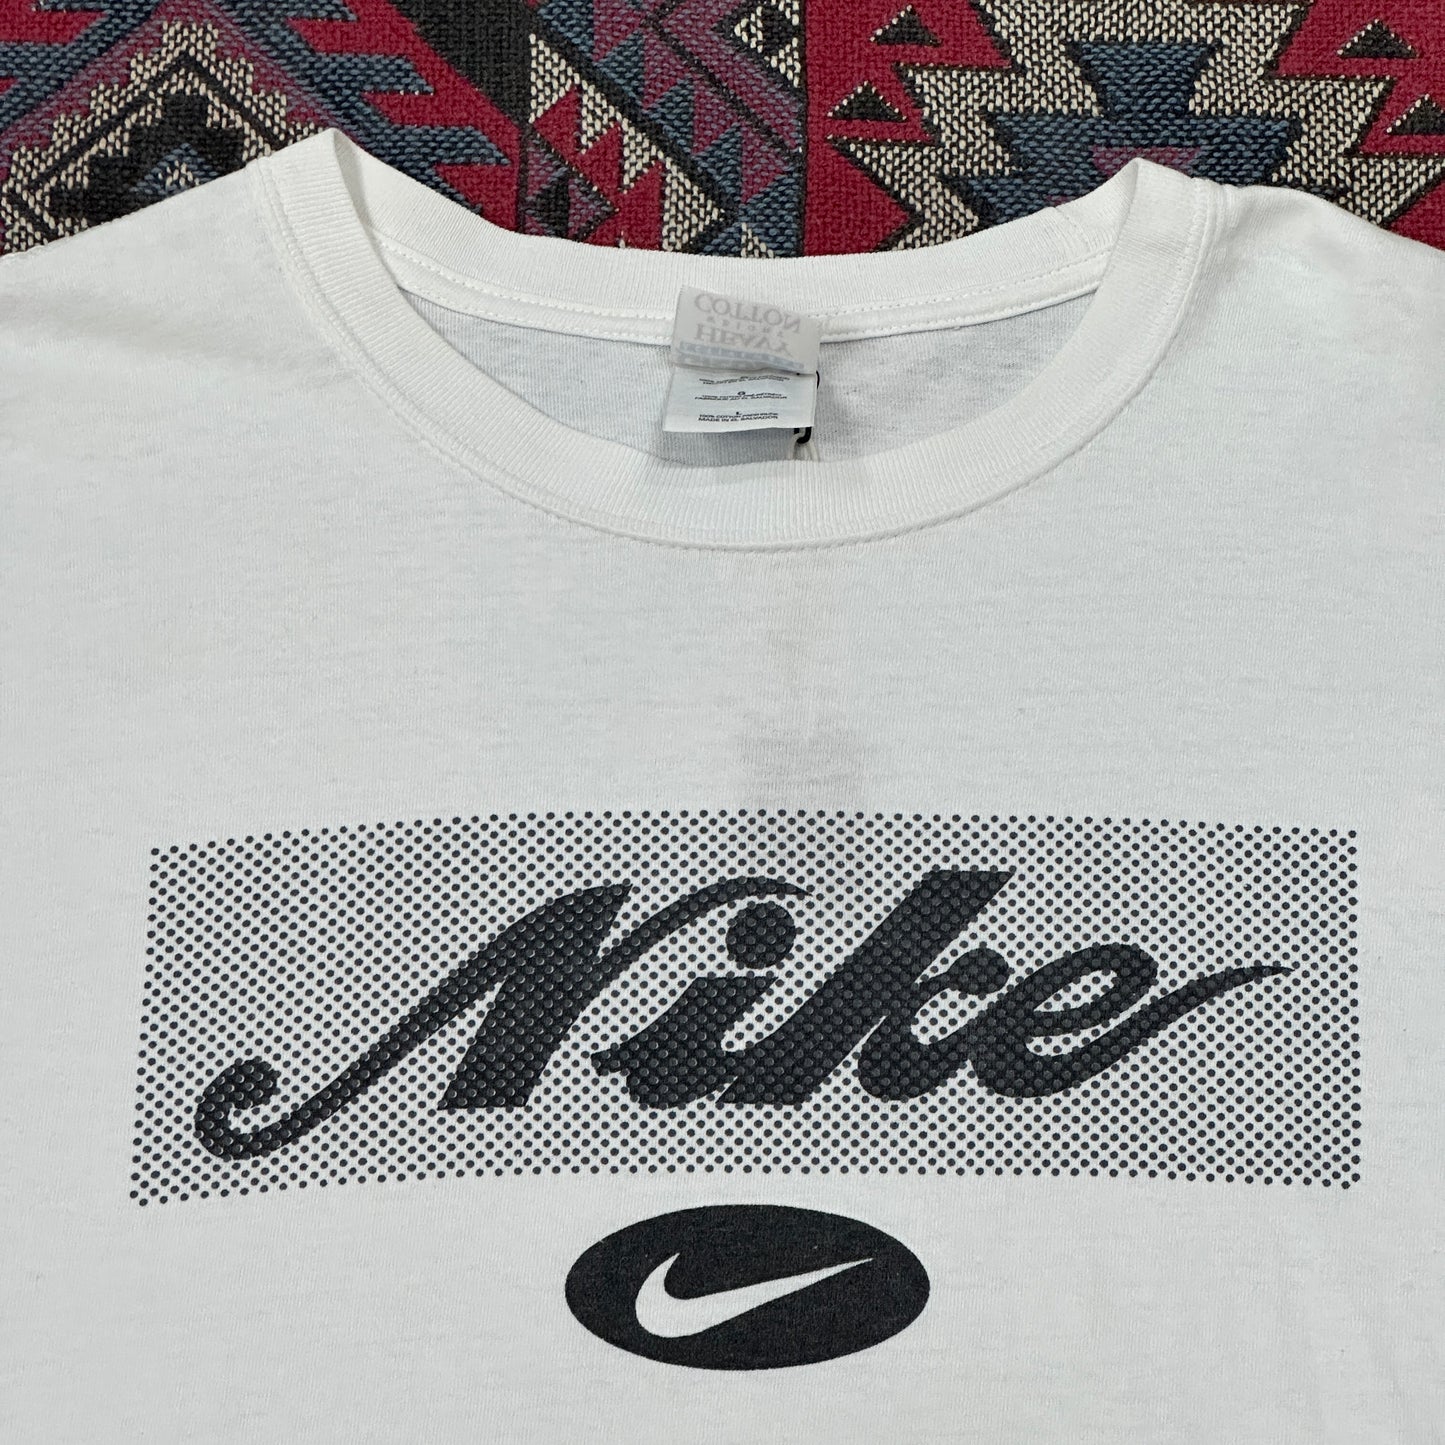 Vintage Nike Spell-outs Bootleg 00's T-shirt